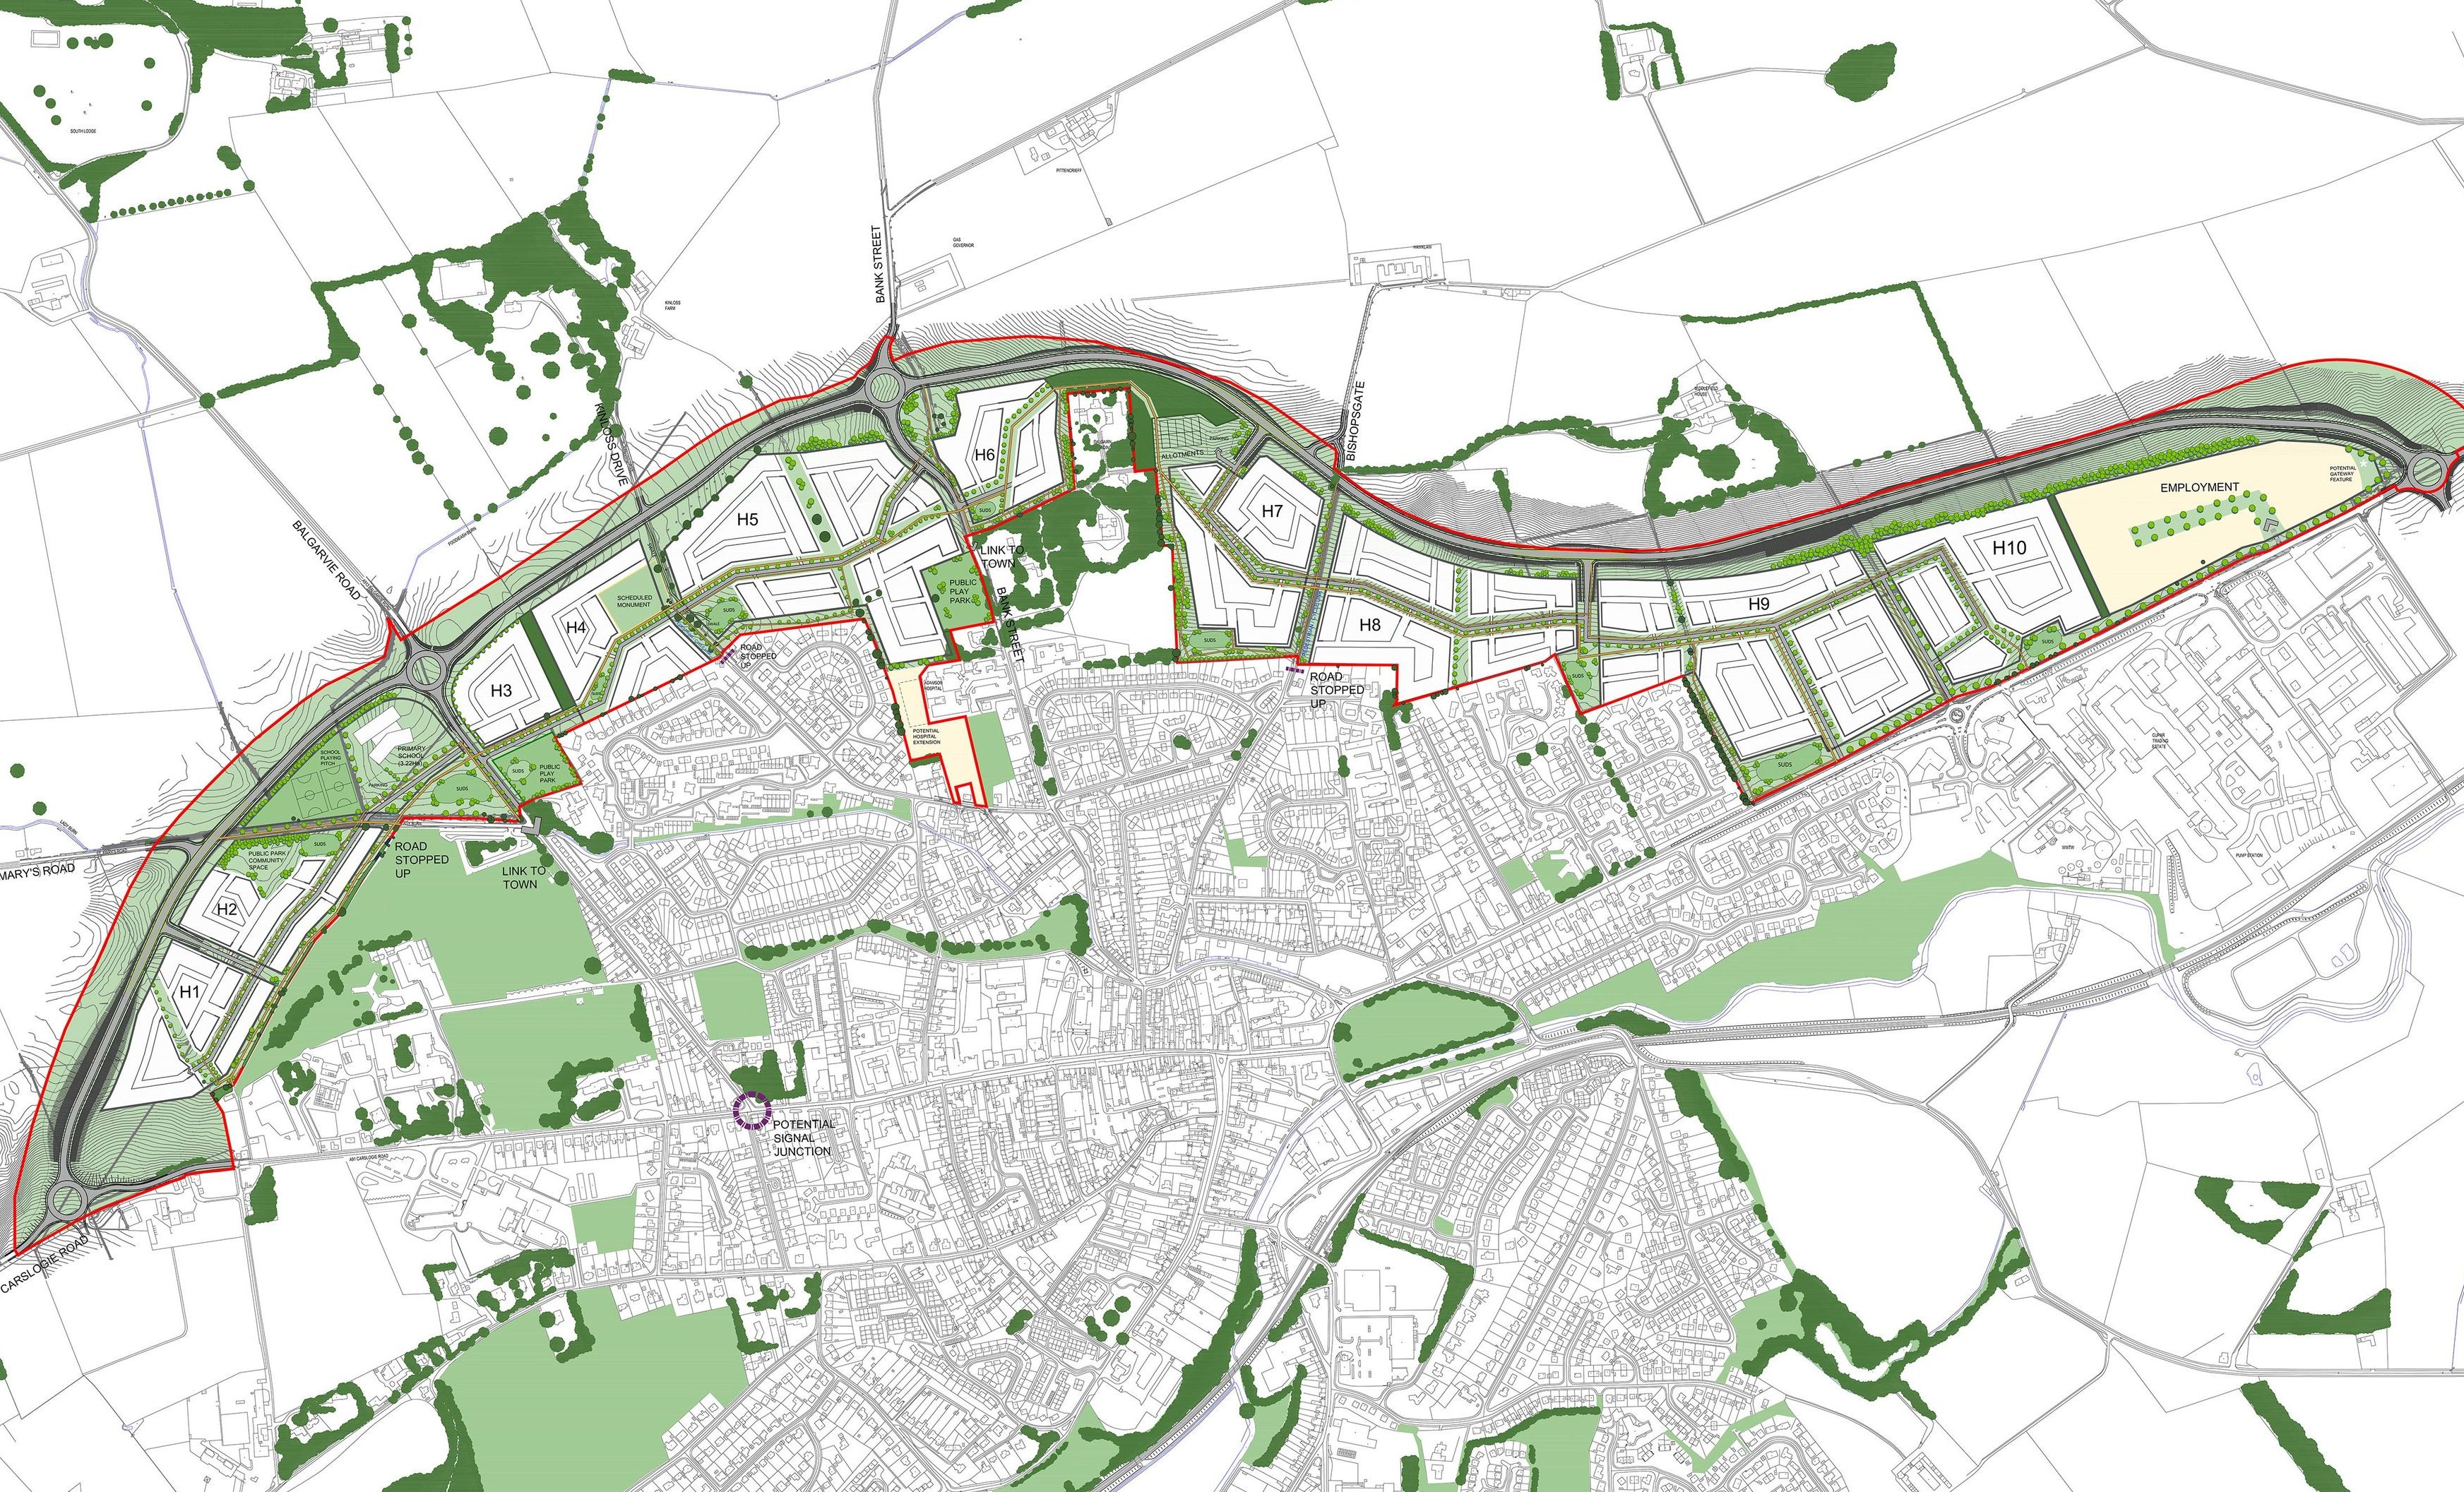 It hopes to work with the Cupar North development